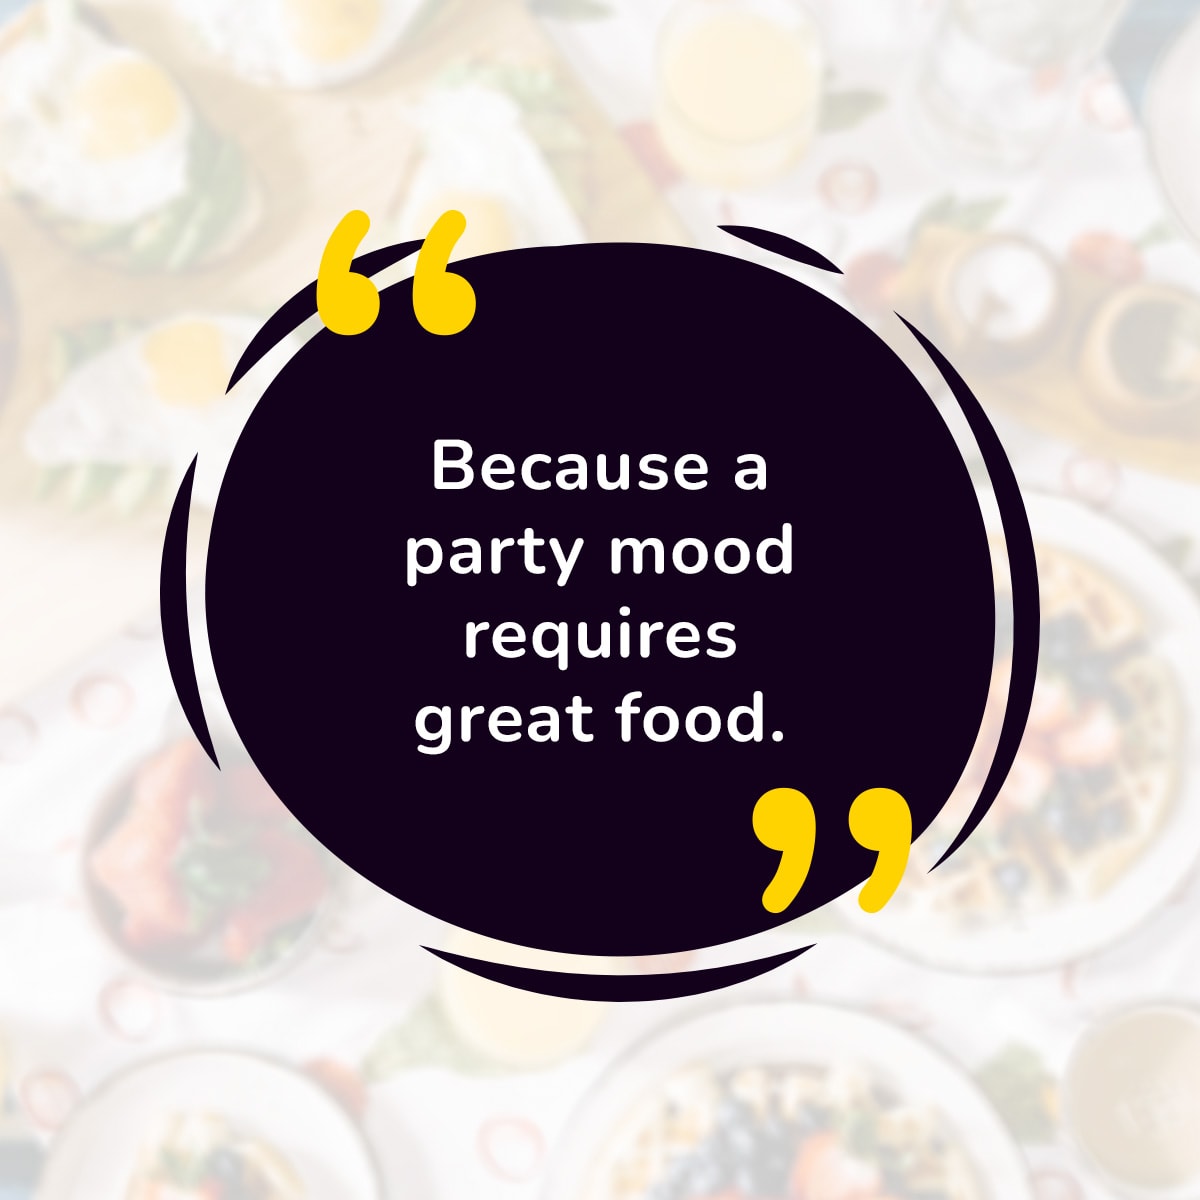 Because a party mood requires great food.